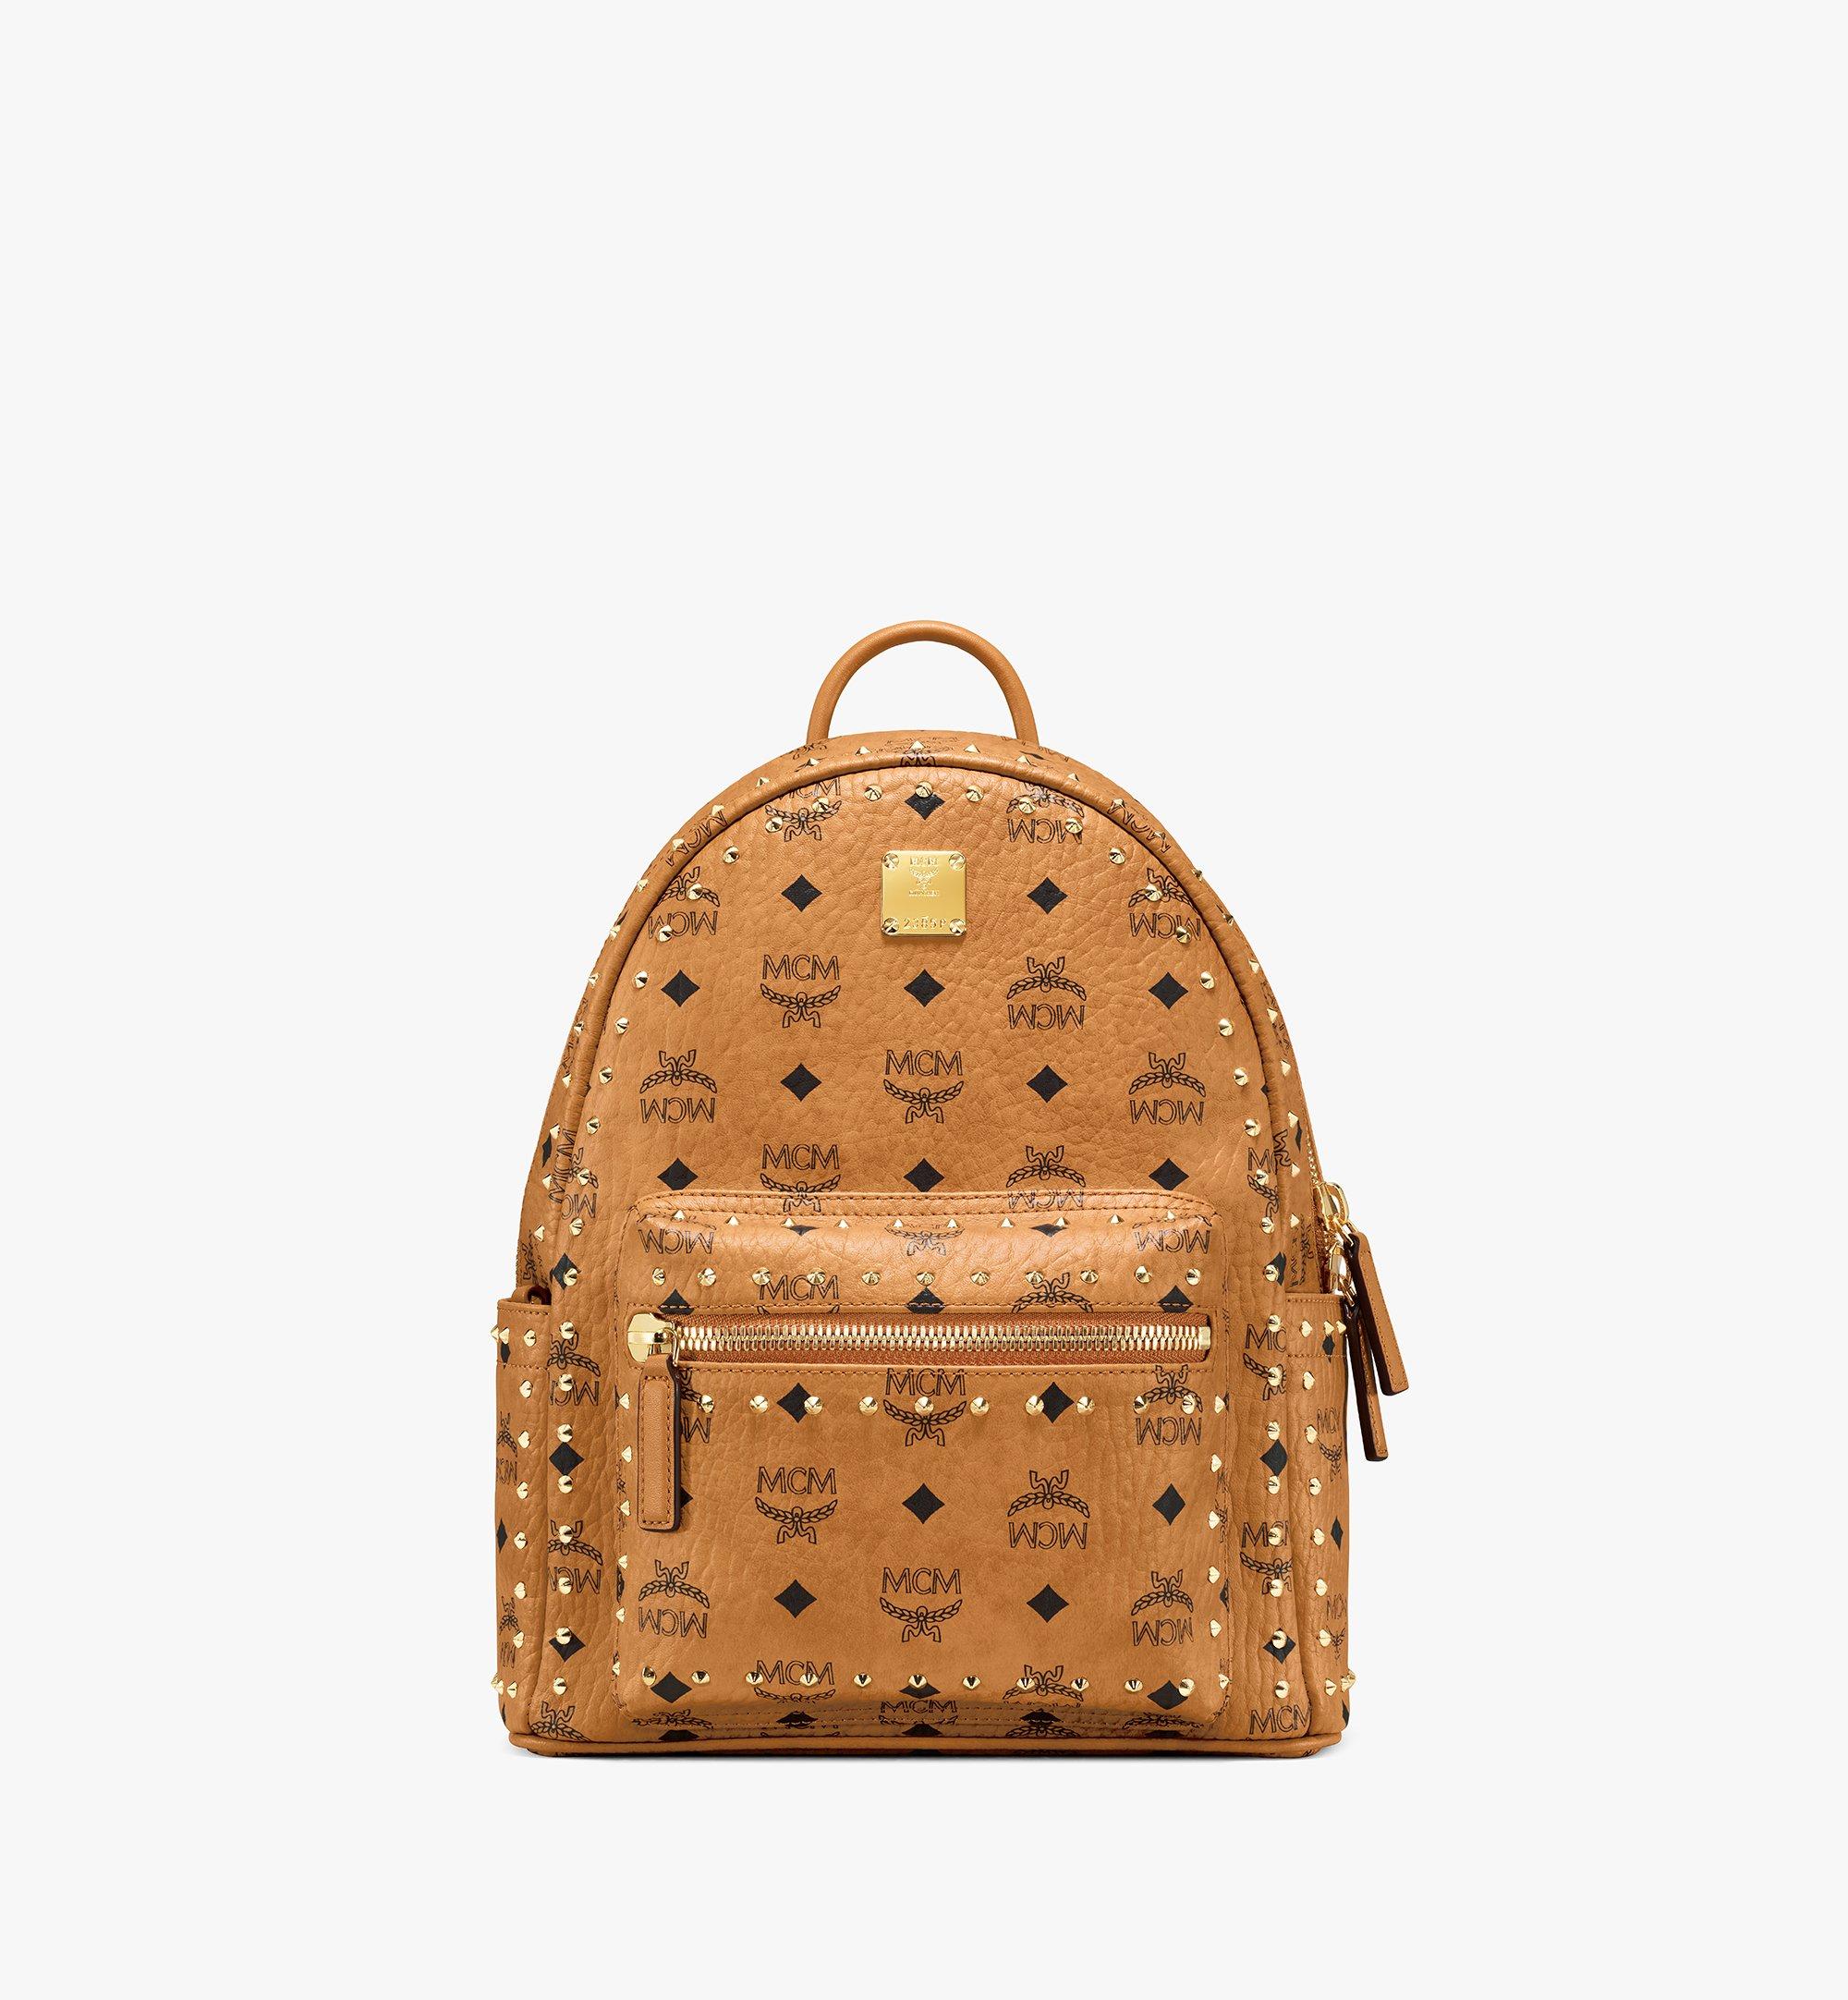 MCM Stark Backpack in Studded Outline Visetos Cognac MMKAAVE01CO001 Alternate View 1